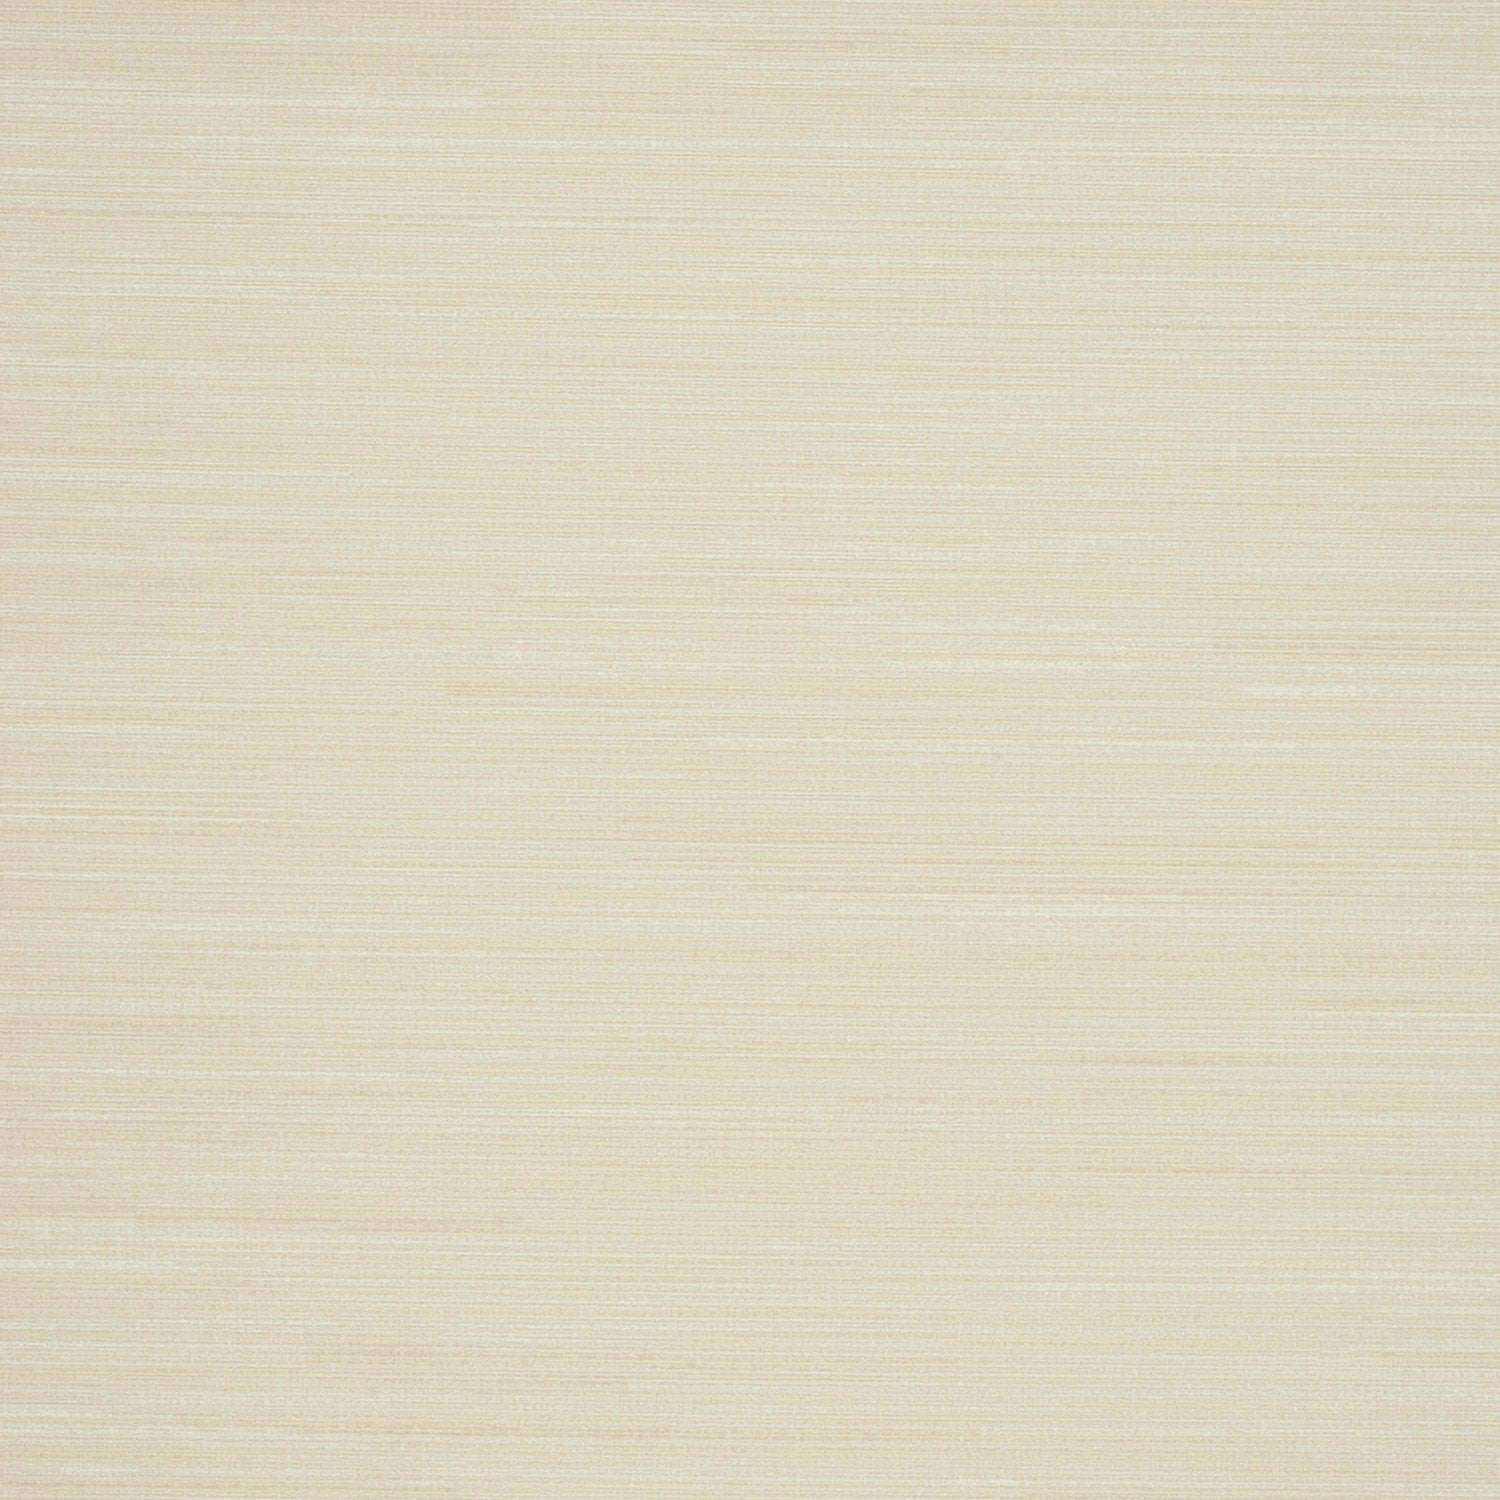 Casbah Silk - Y46487 - Wallcovering - Vycon - Kube Contract